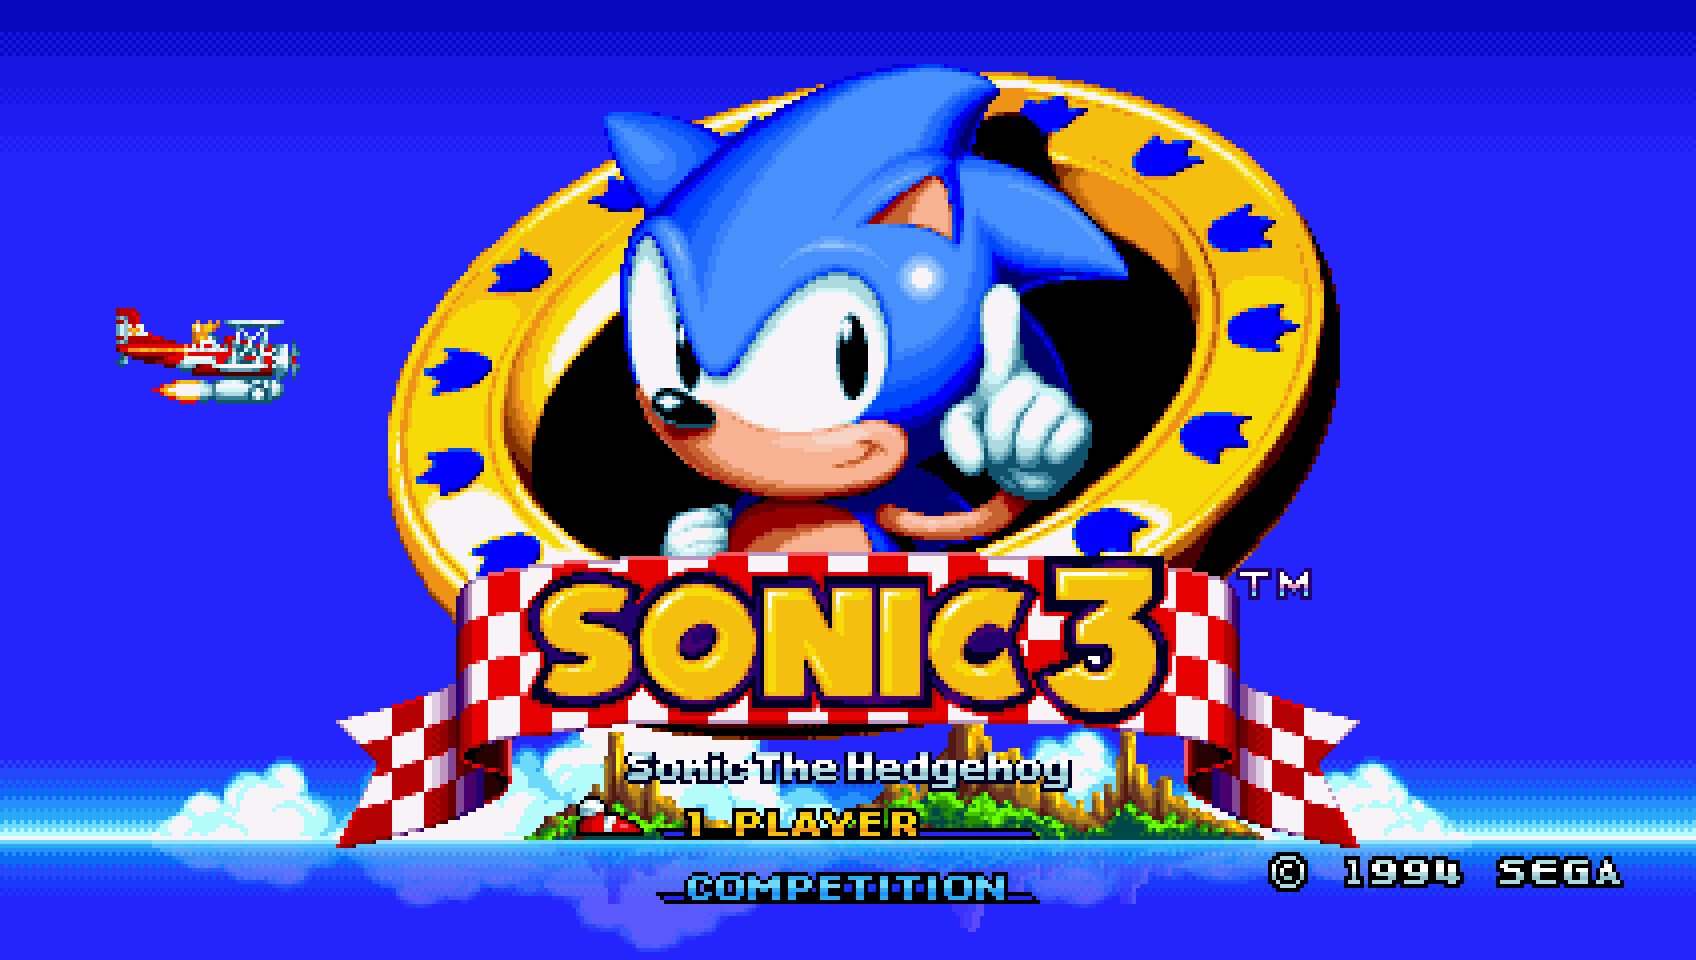 They actually remade the original Sonic 1 title screen sprites for